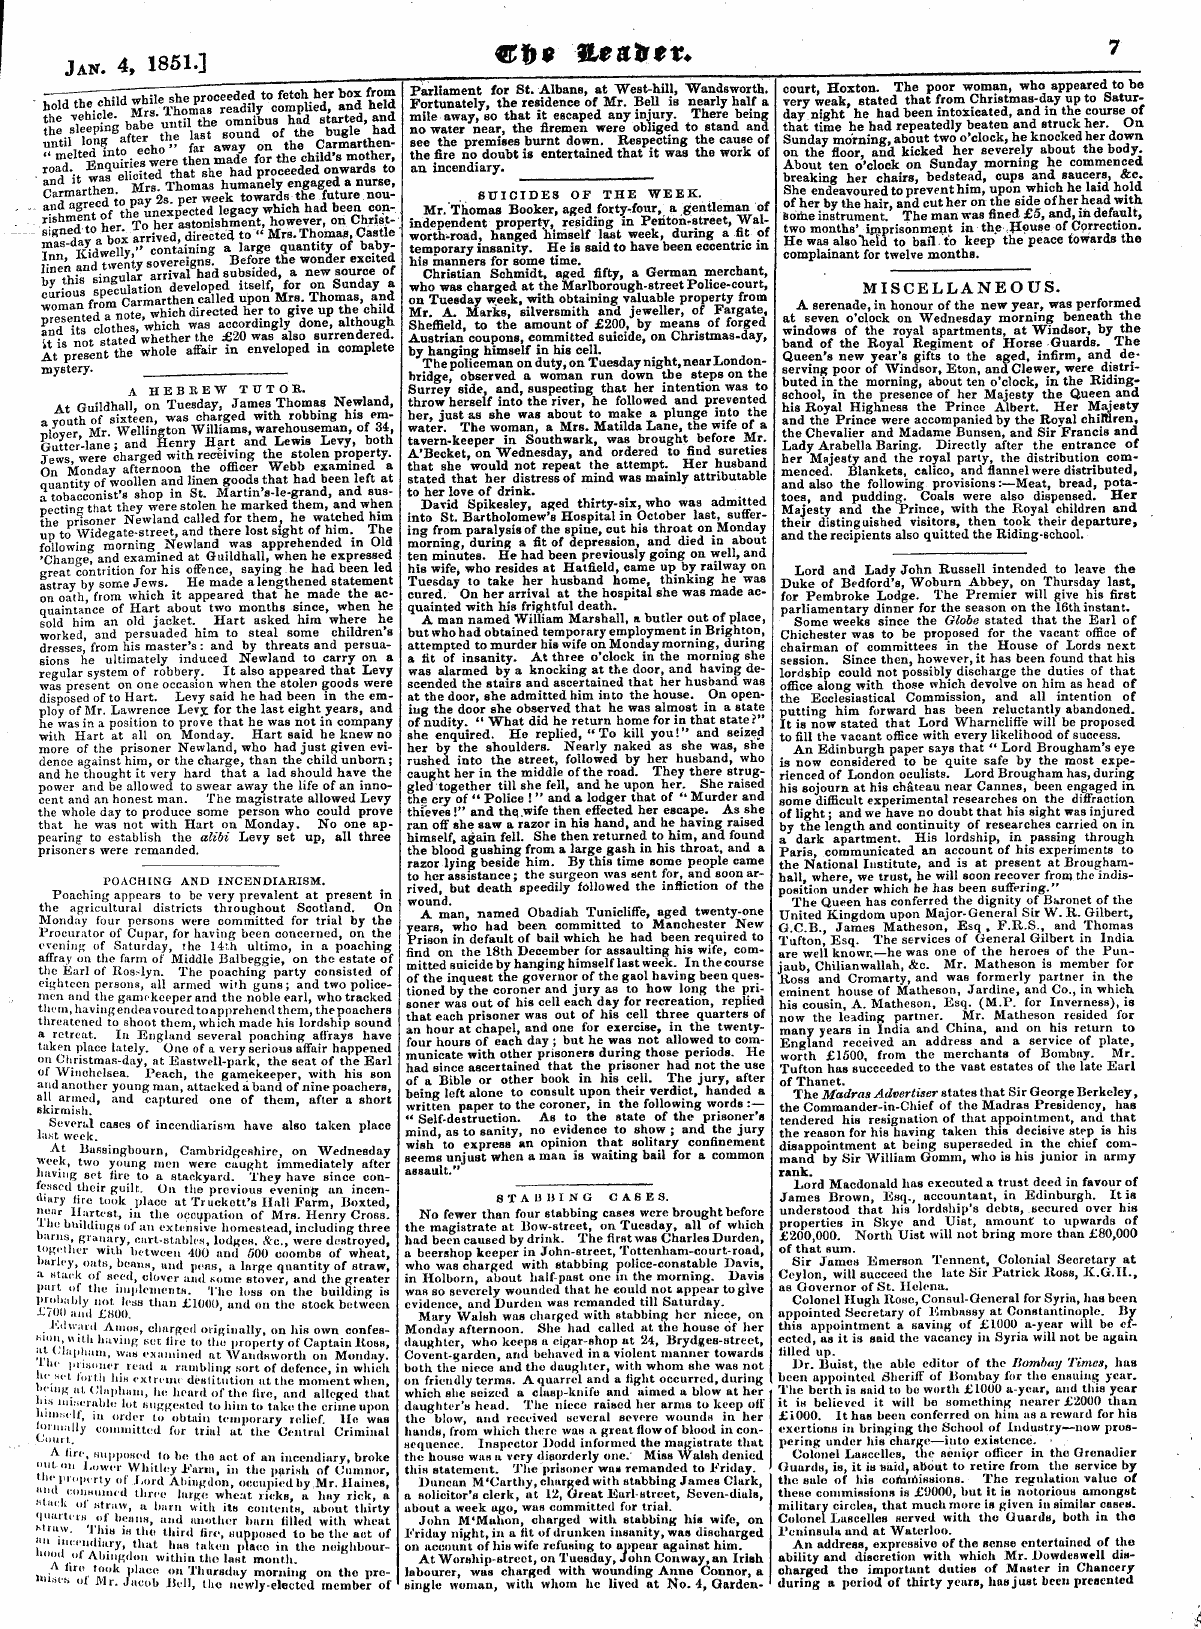 Leader (1850-1860): jS F Y, Country edition - Jan. 4, 1851.] 1